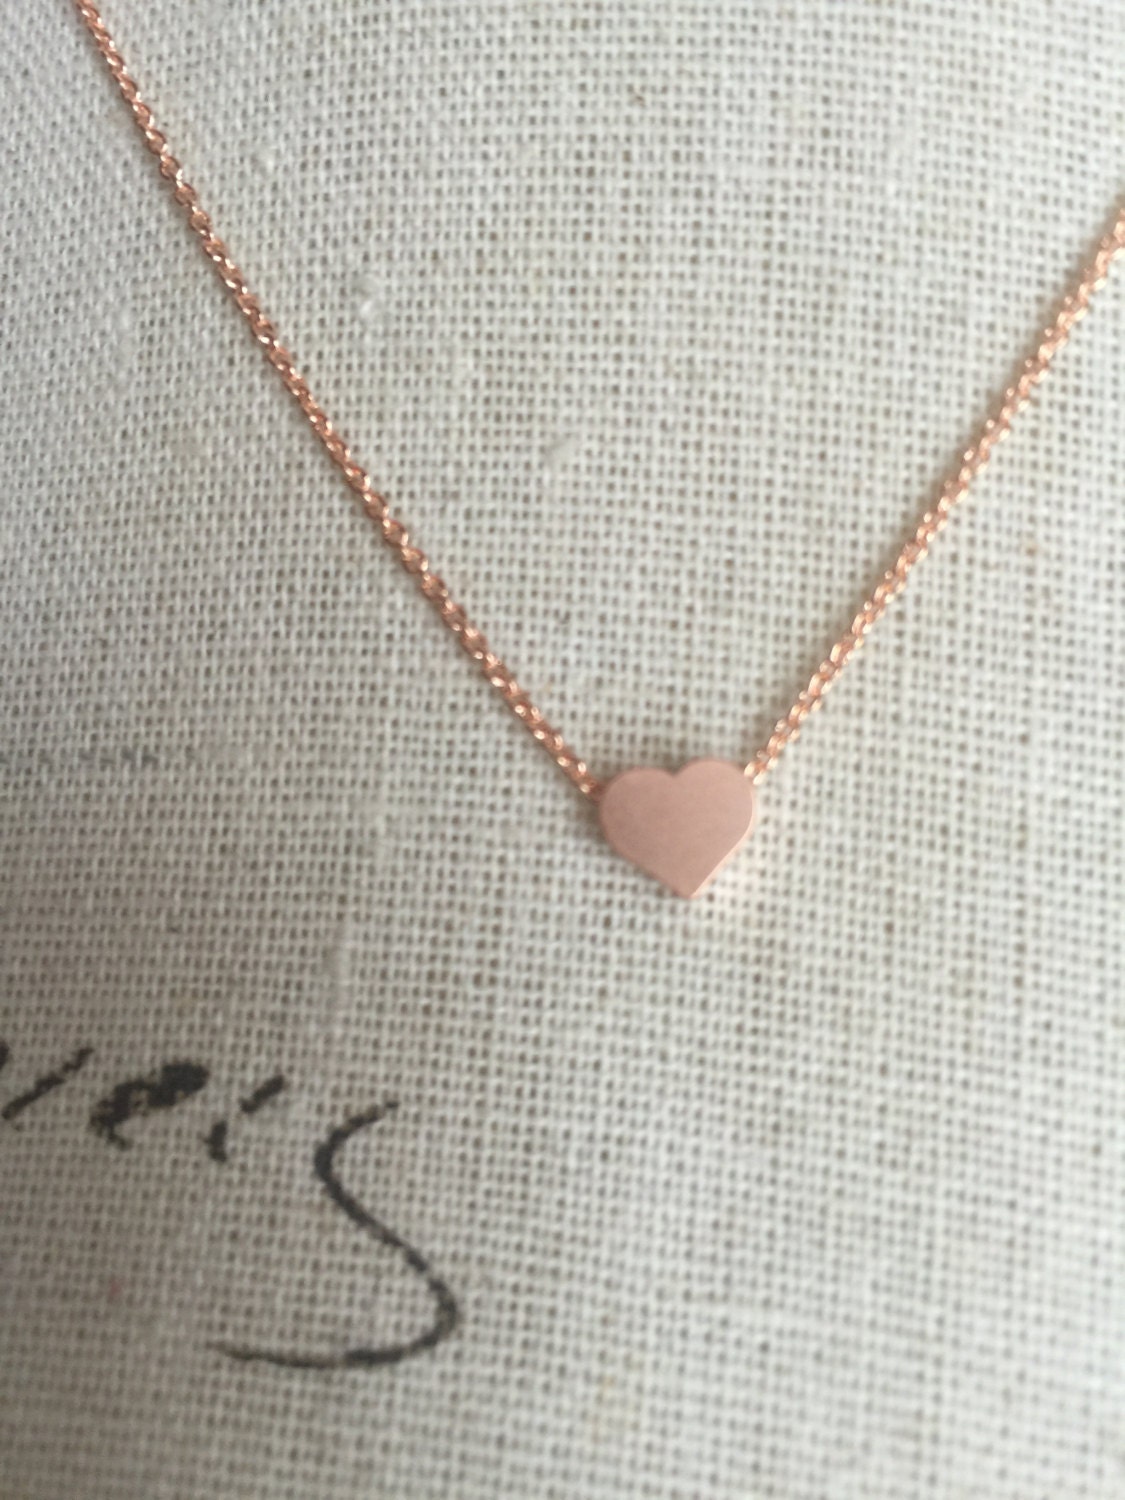 New Rose gold filled chain and small floating heart, layered jewelry rose gold filled chain